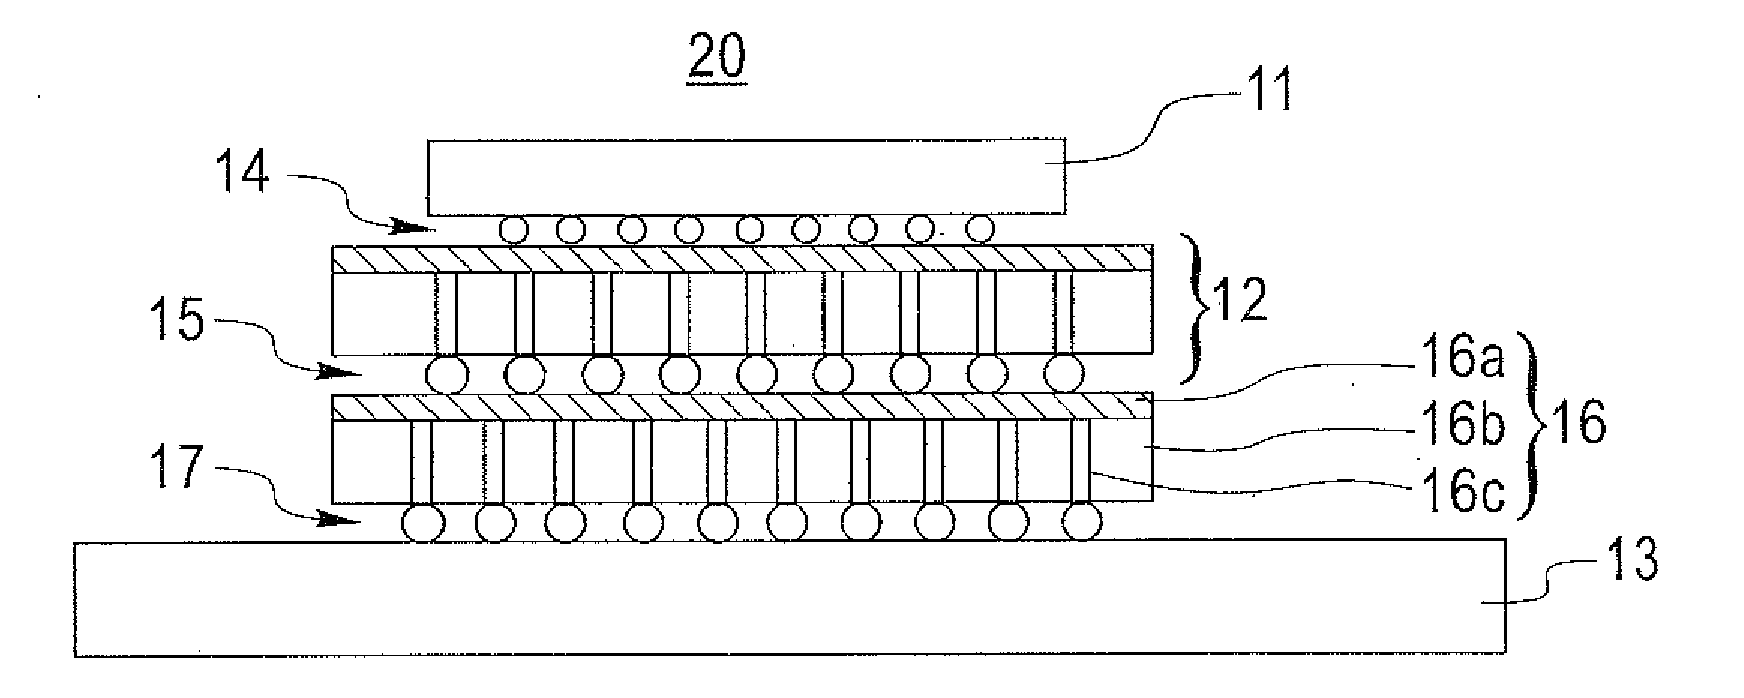 Apparatus and methods for constructing semiconductor chip packages with silicon space transformer carriers